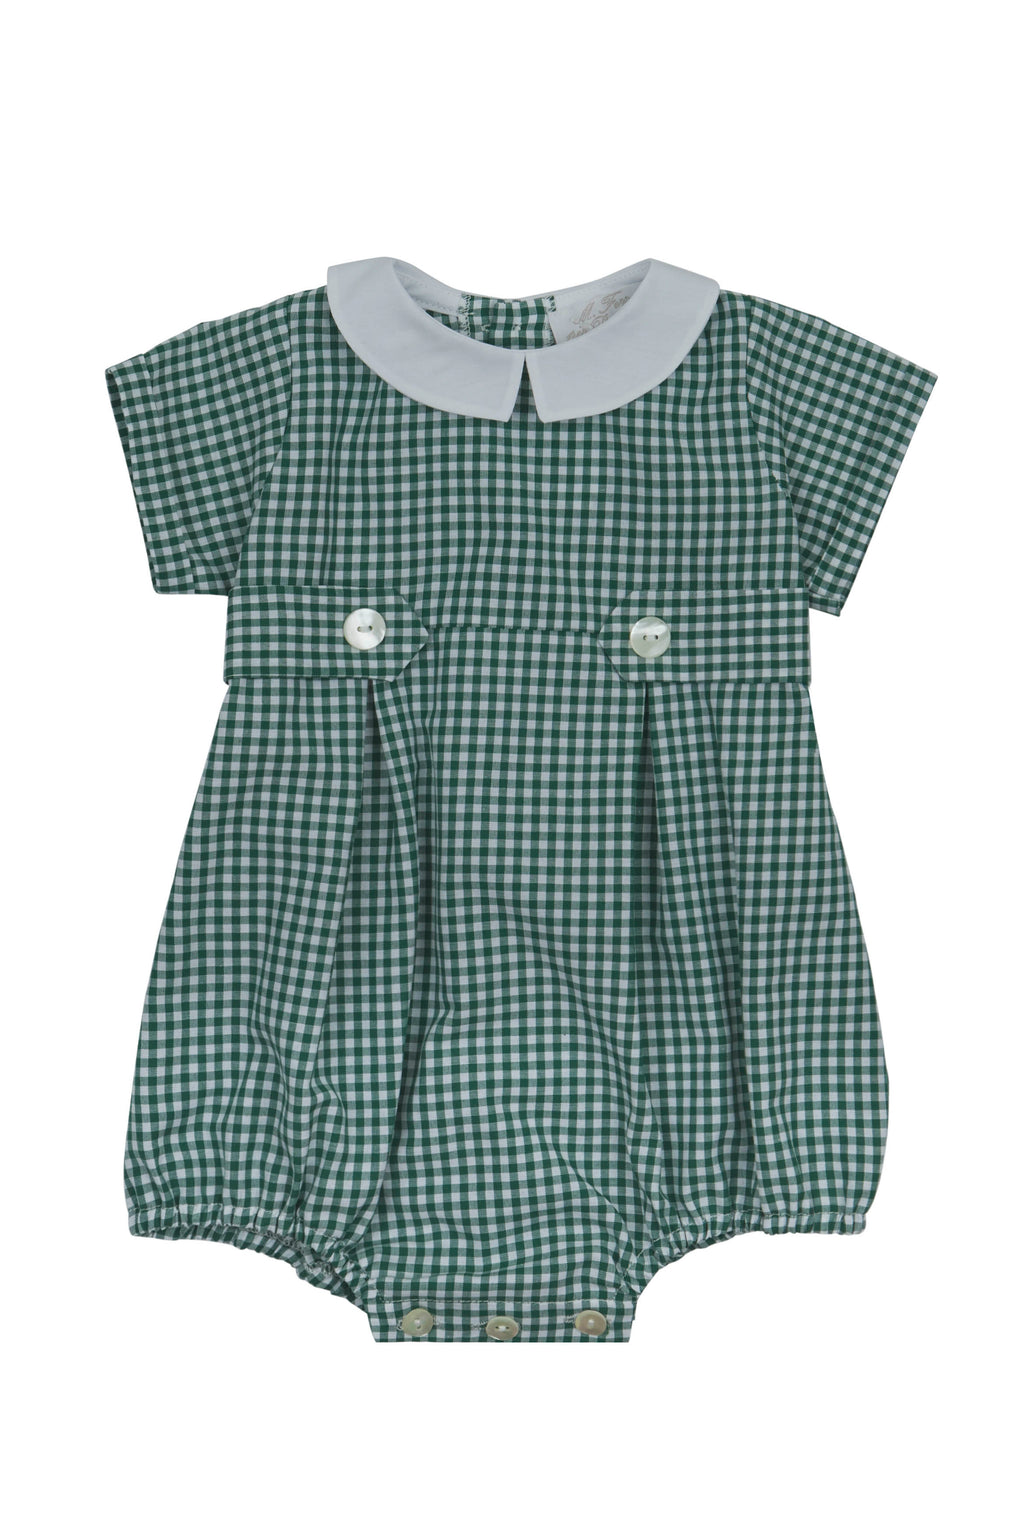 CHECKERED ROMPER VICKY BUTTONS